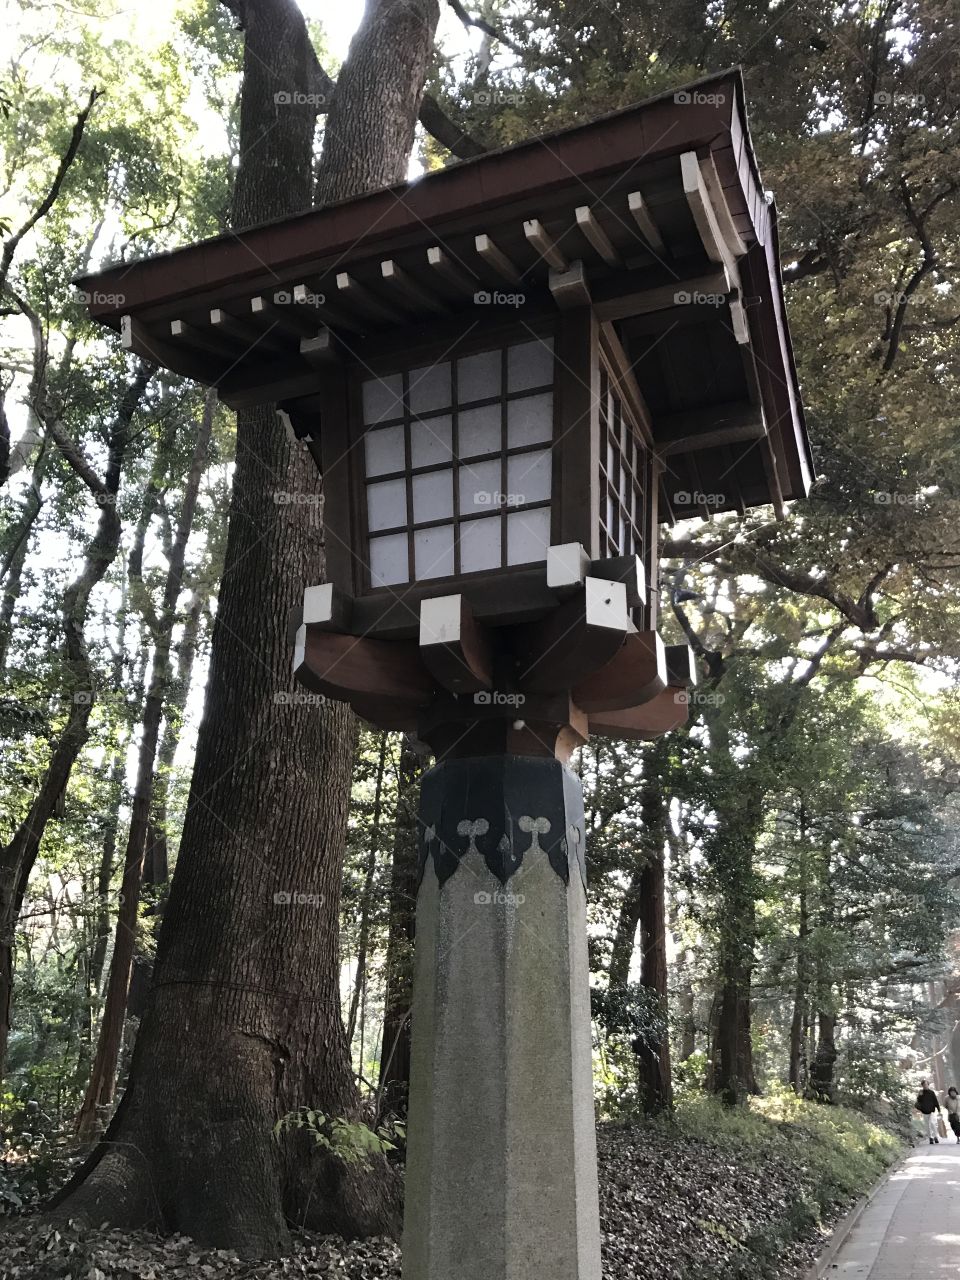 Japan temple, Meiji Shrine, located in Shibuya, Tokyo, is the Shinto shrine that is dedicated to the deified spirits of Emperor Meiji and his wife, Empress Shōken. Lamp post 